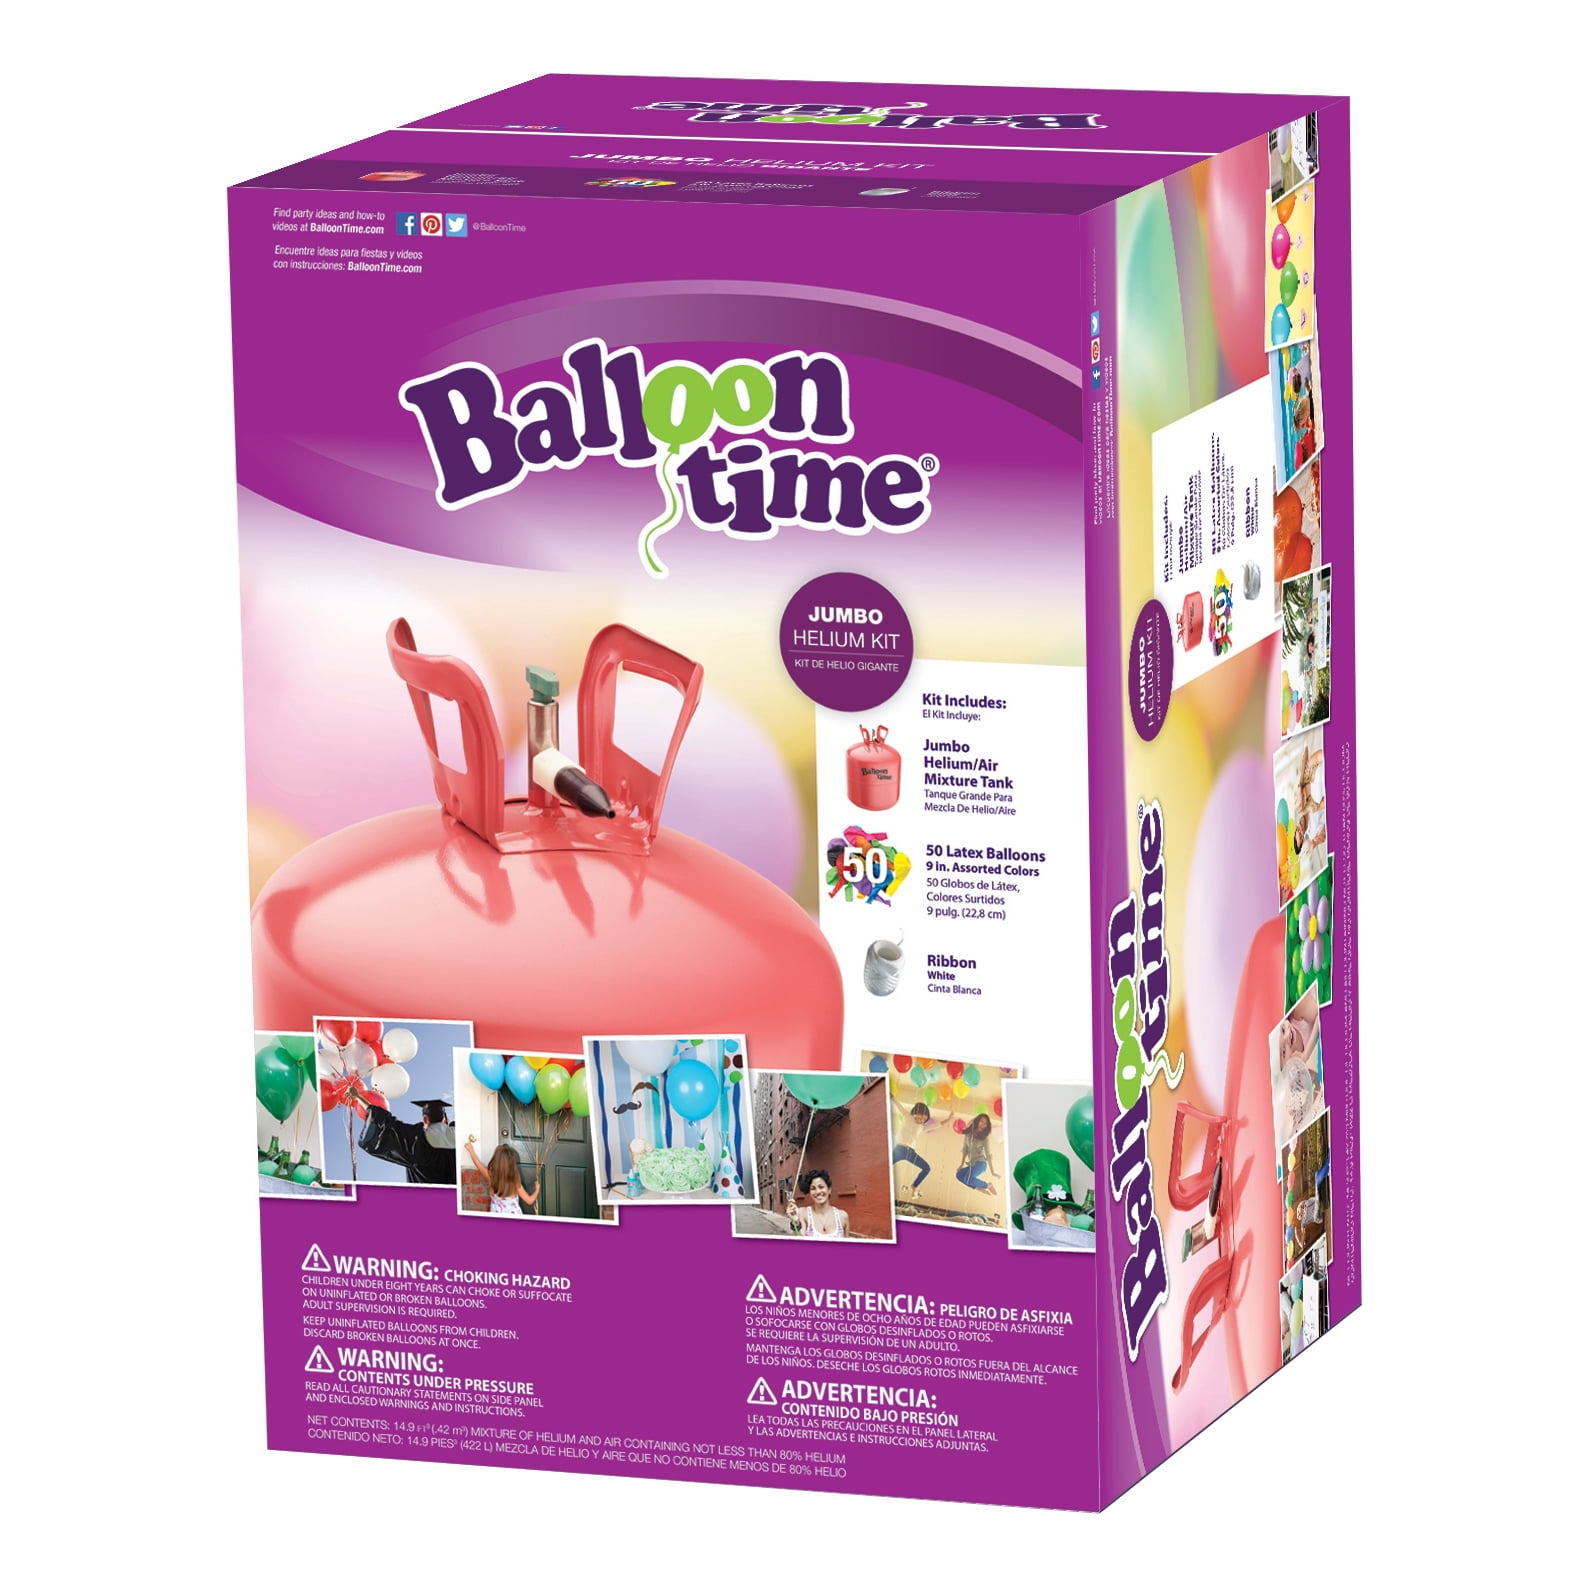 Helium 50 Balloon Canister